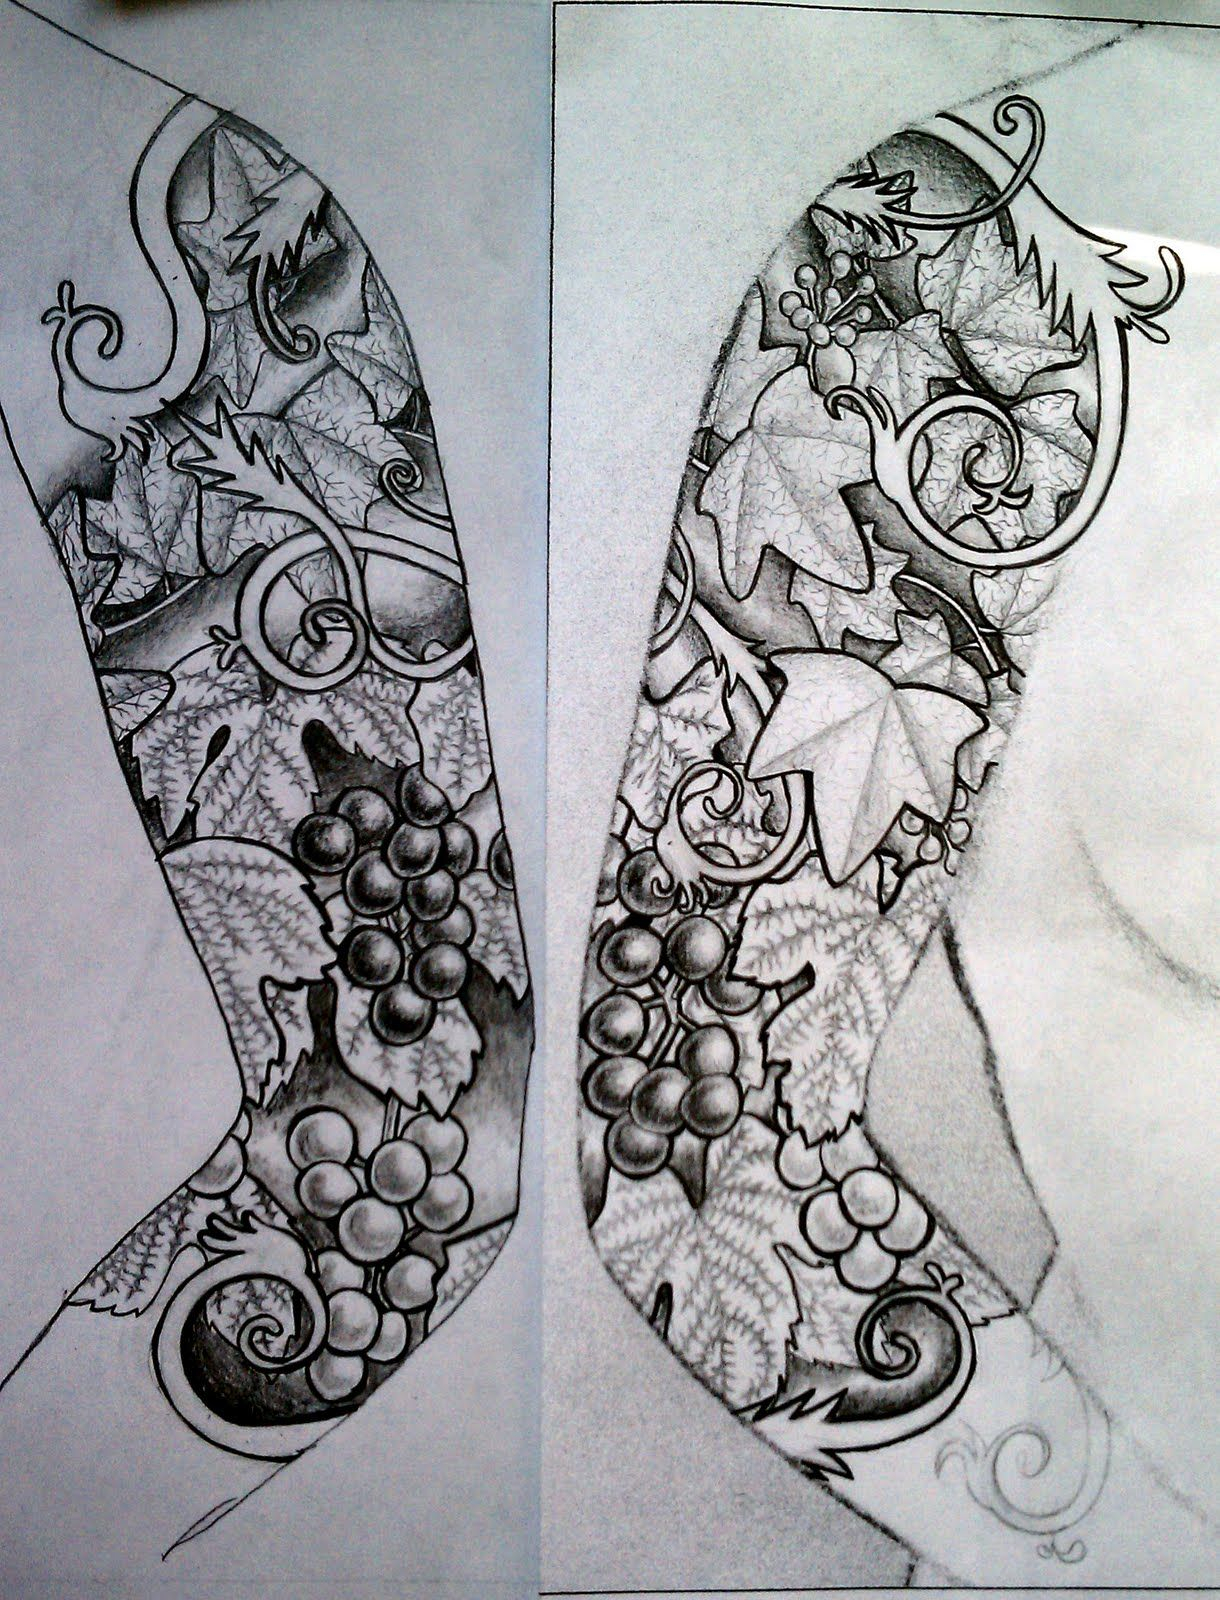 Full Sleeve Tattoo Designs Drawings Picture Oial 12201600 in size 1220 X 1600